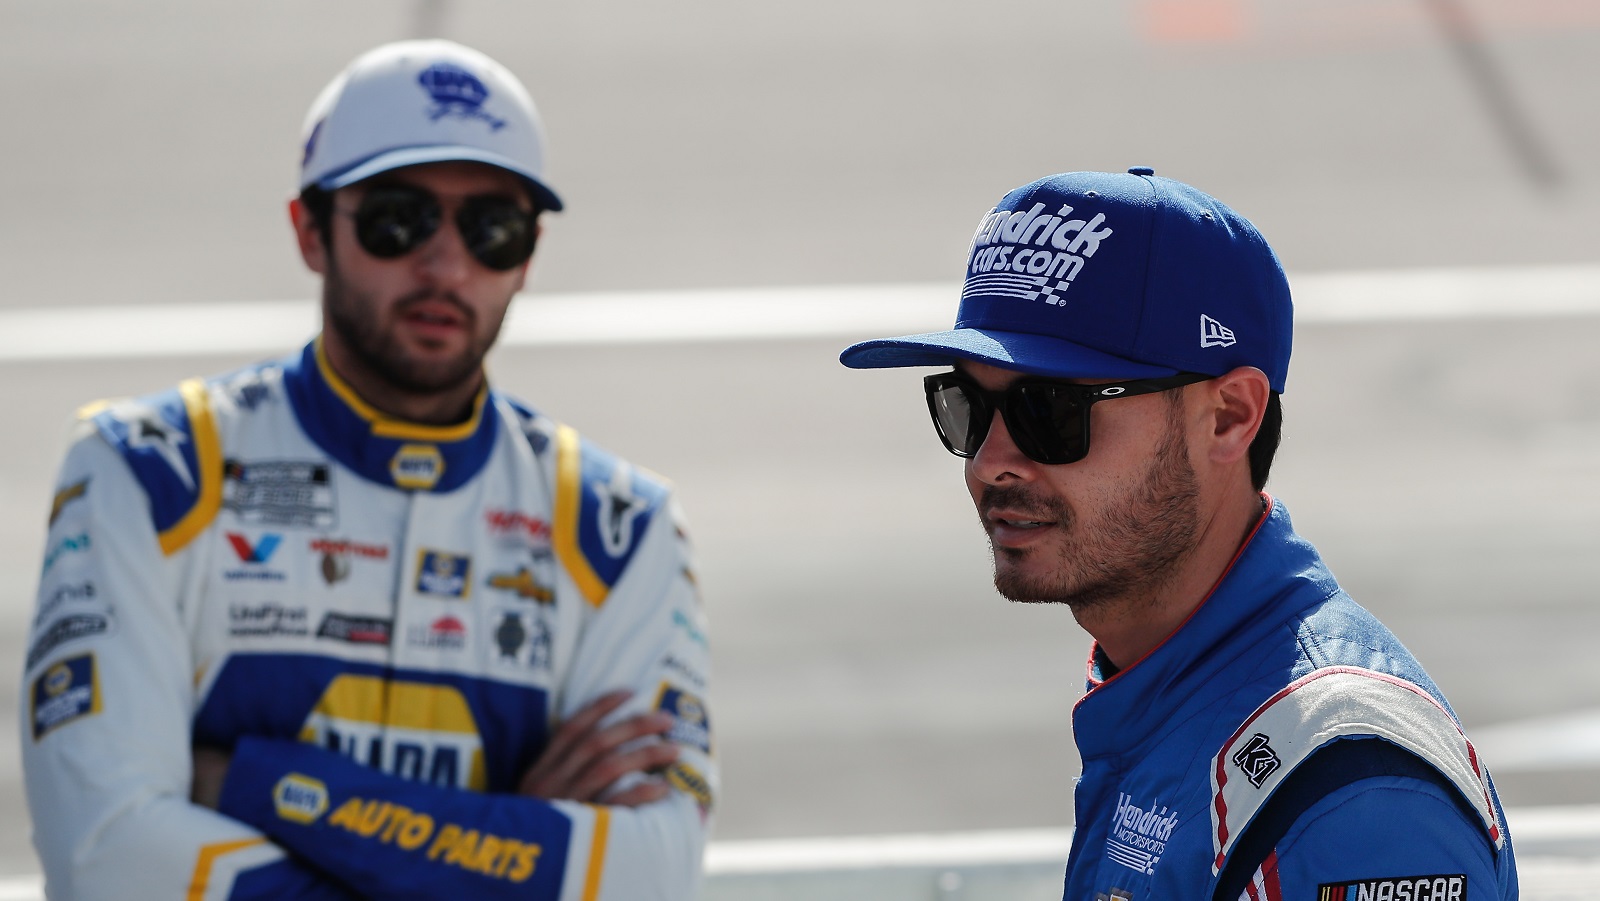 Kyle Larson walks in front of Hendrick Motorsports teammate Chase Elliott before the NASCAR Cup Series Championship 4 on Nov. 7, 2021, at Phoenix Raceway. | Kevin Abele/Icon Sportswire via Getty Images